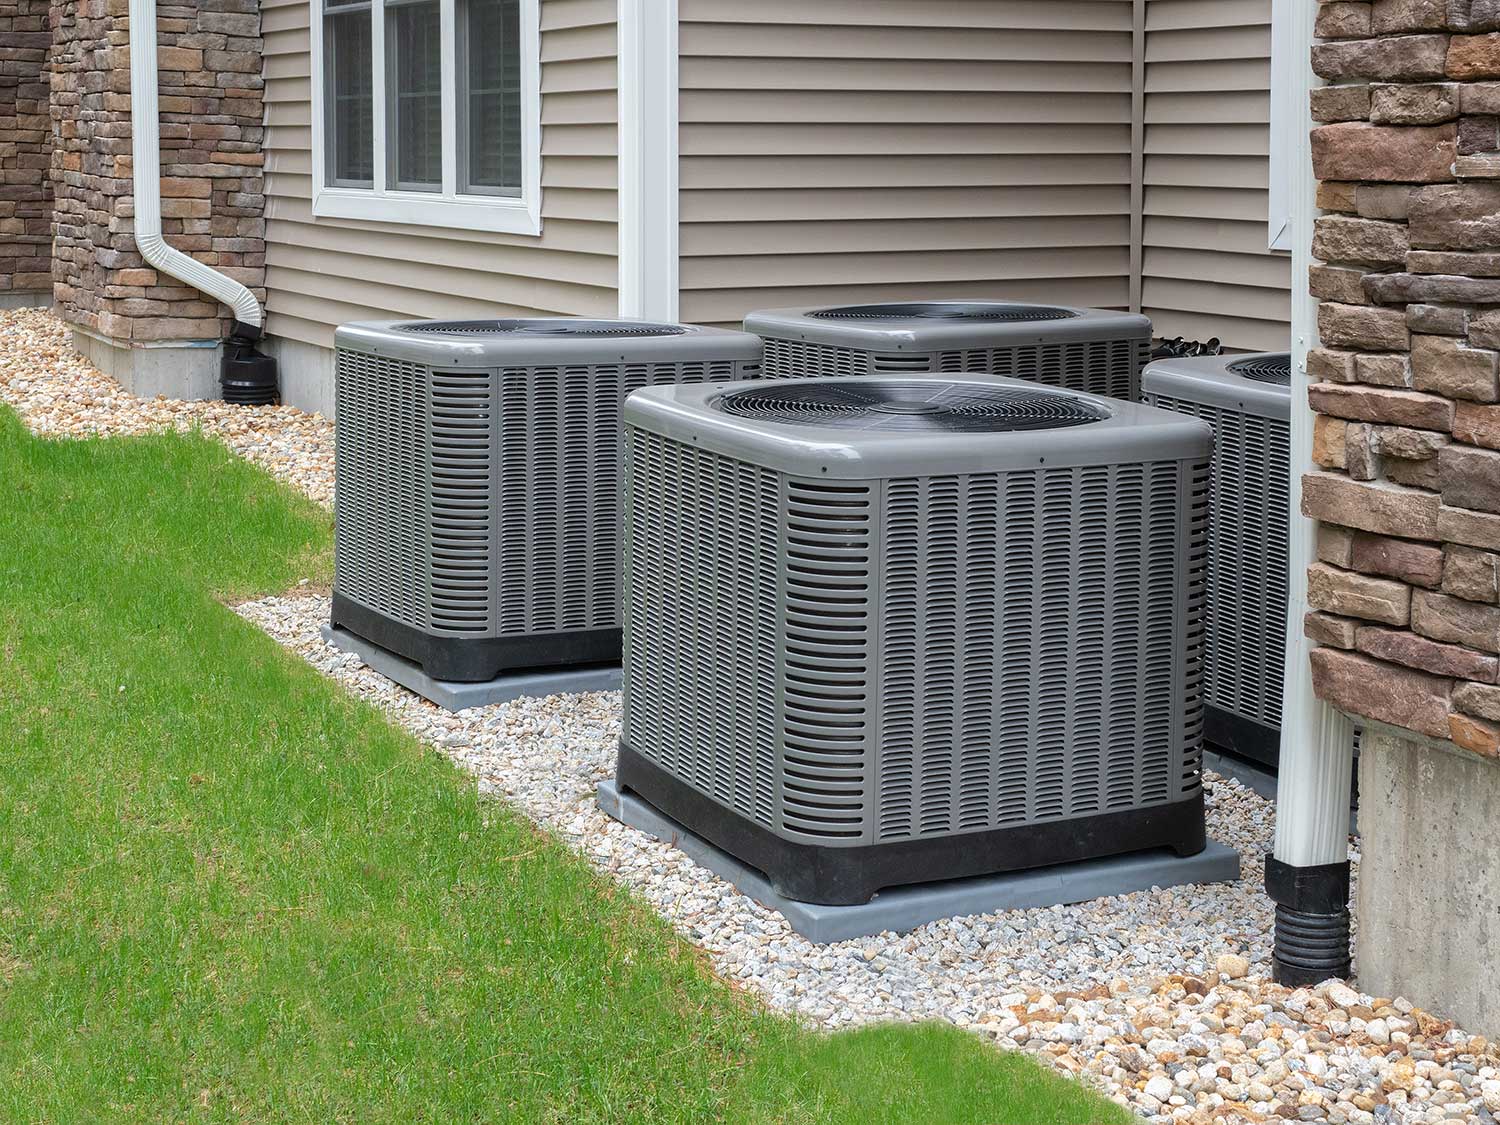 Zoned Heating & A/C is all about practicality